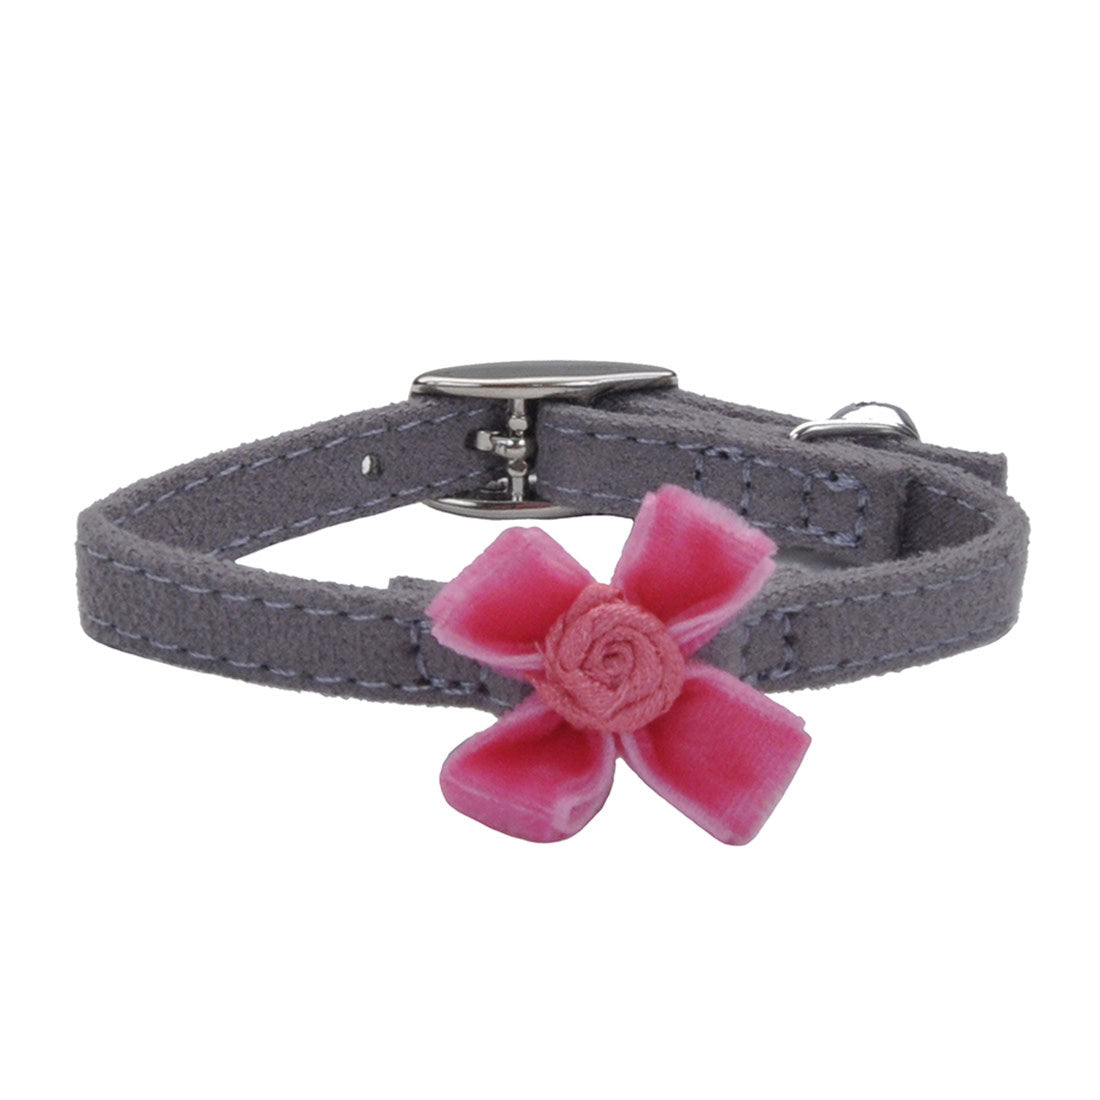 Safety Kitten Collar with Bow